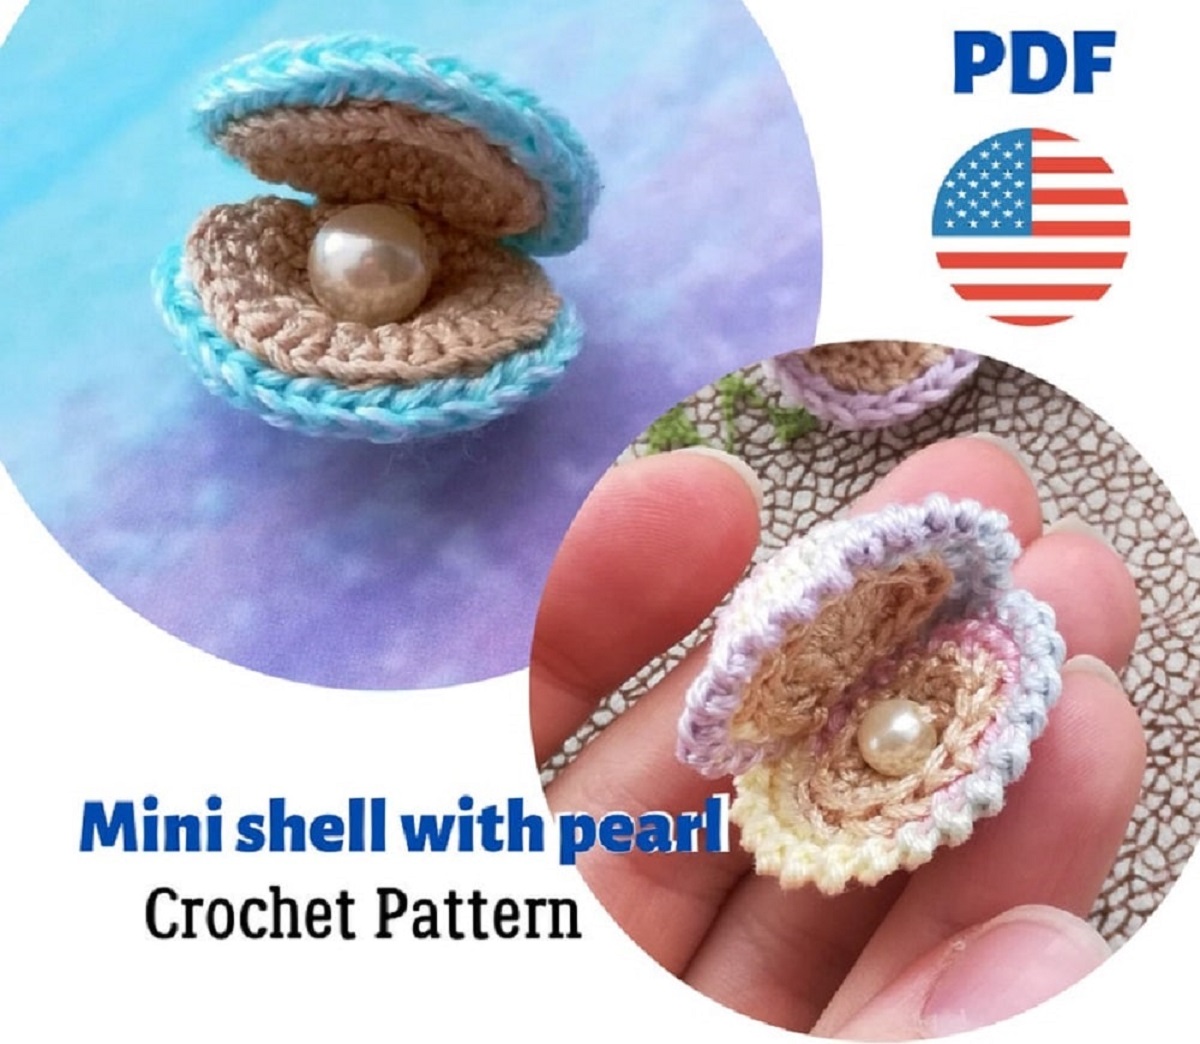 A small pink and yellow crochet clam resting on a hand with a pearl inside and a blue and brown open clam with a small pearl resting inside.